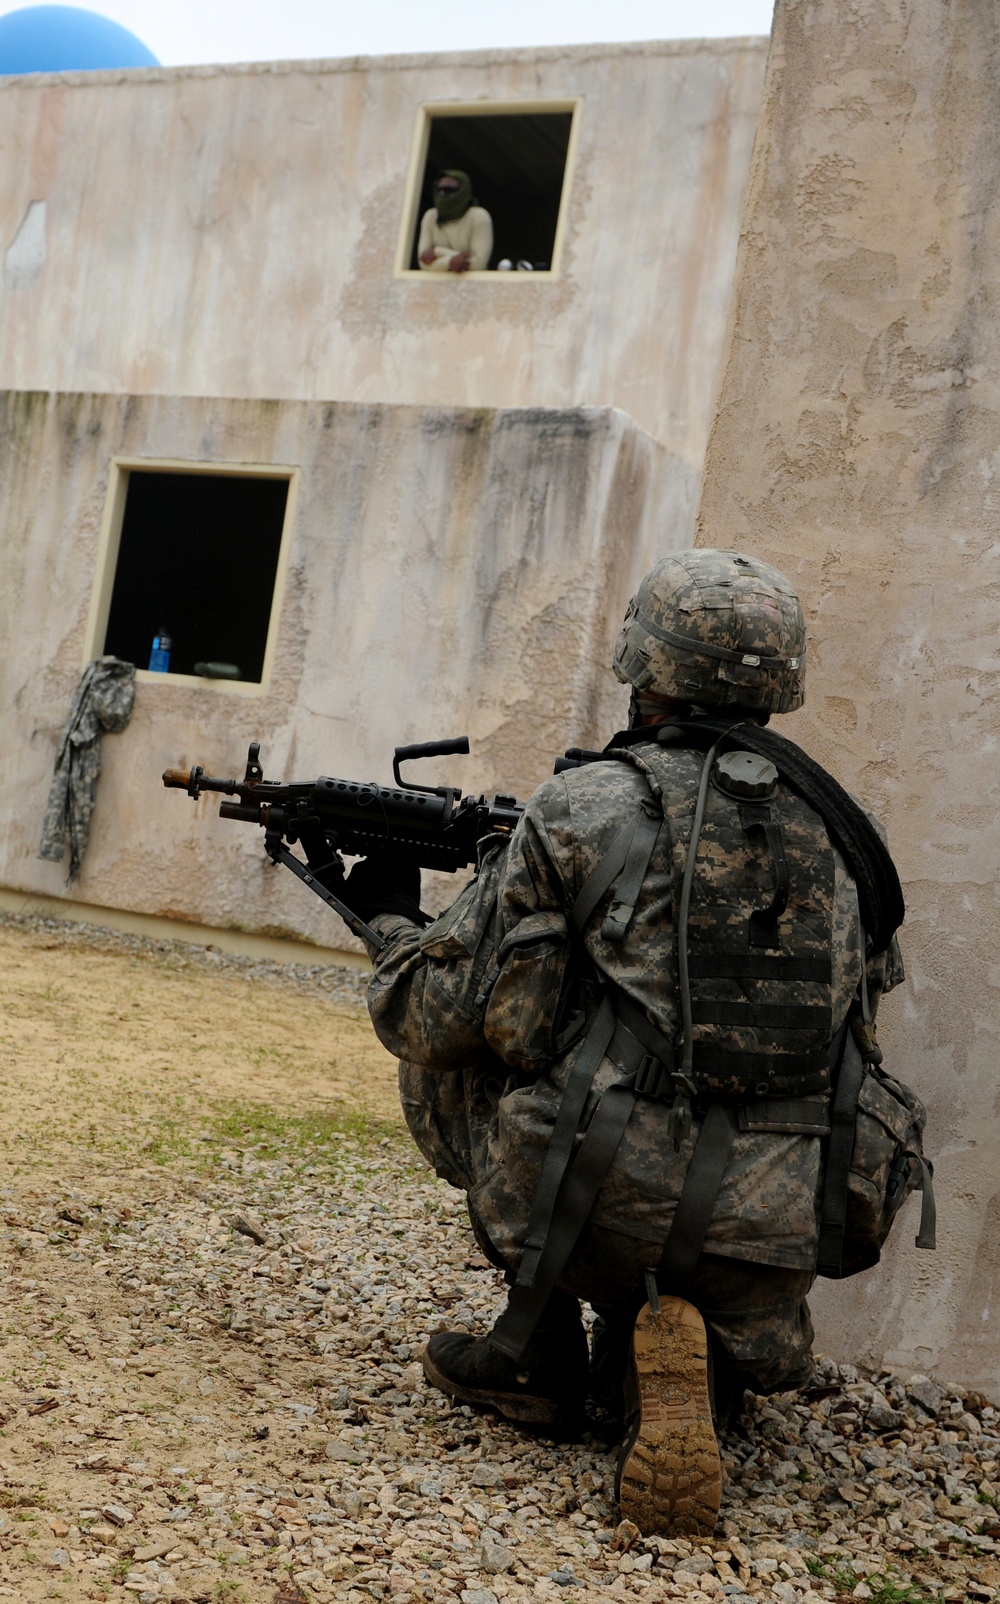 505th paratroopers provides security in mockup village